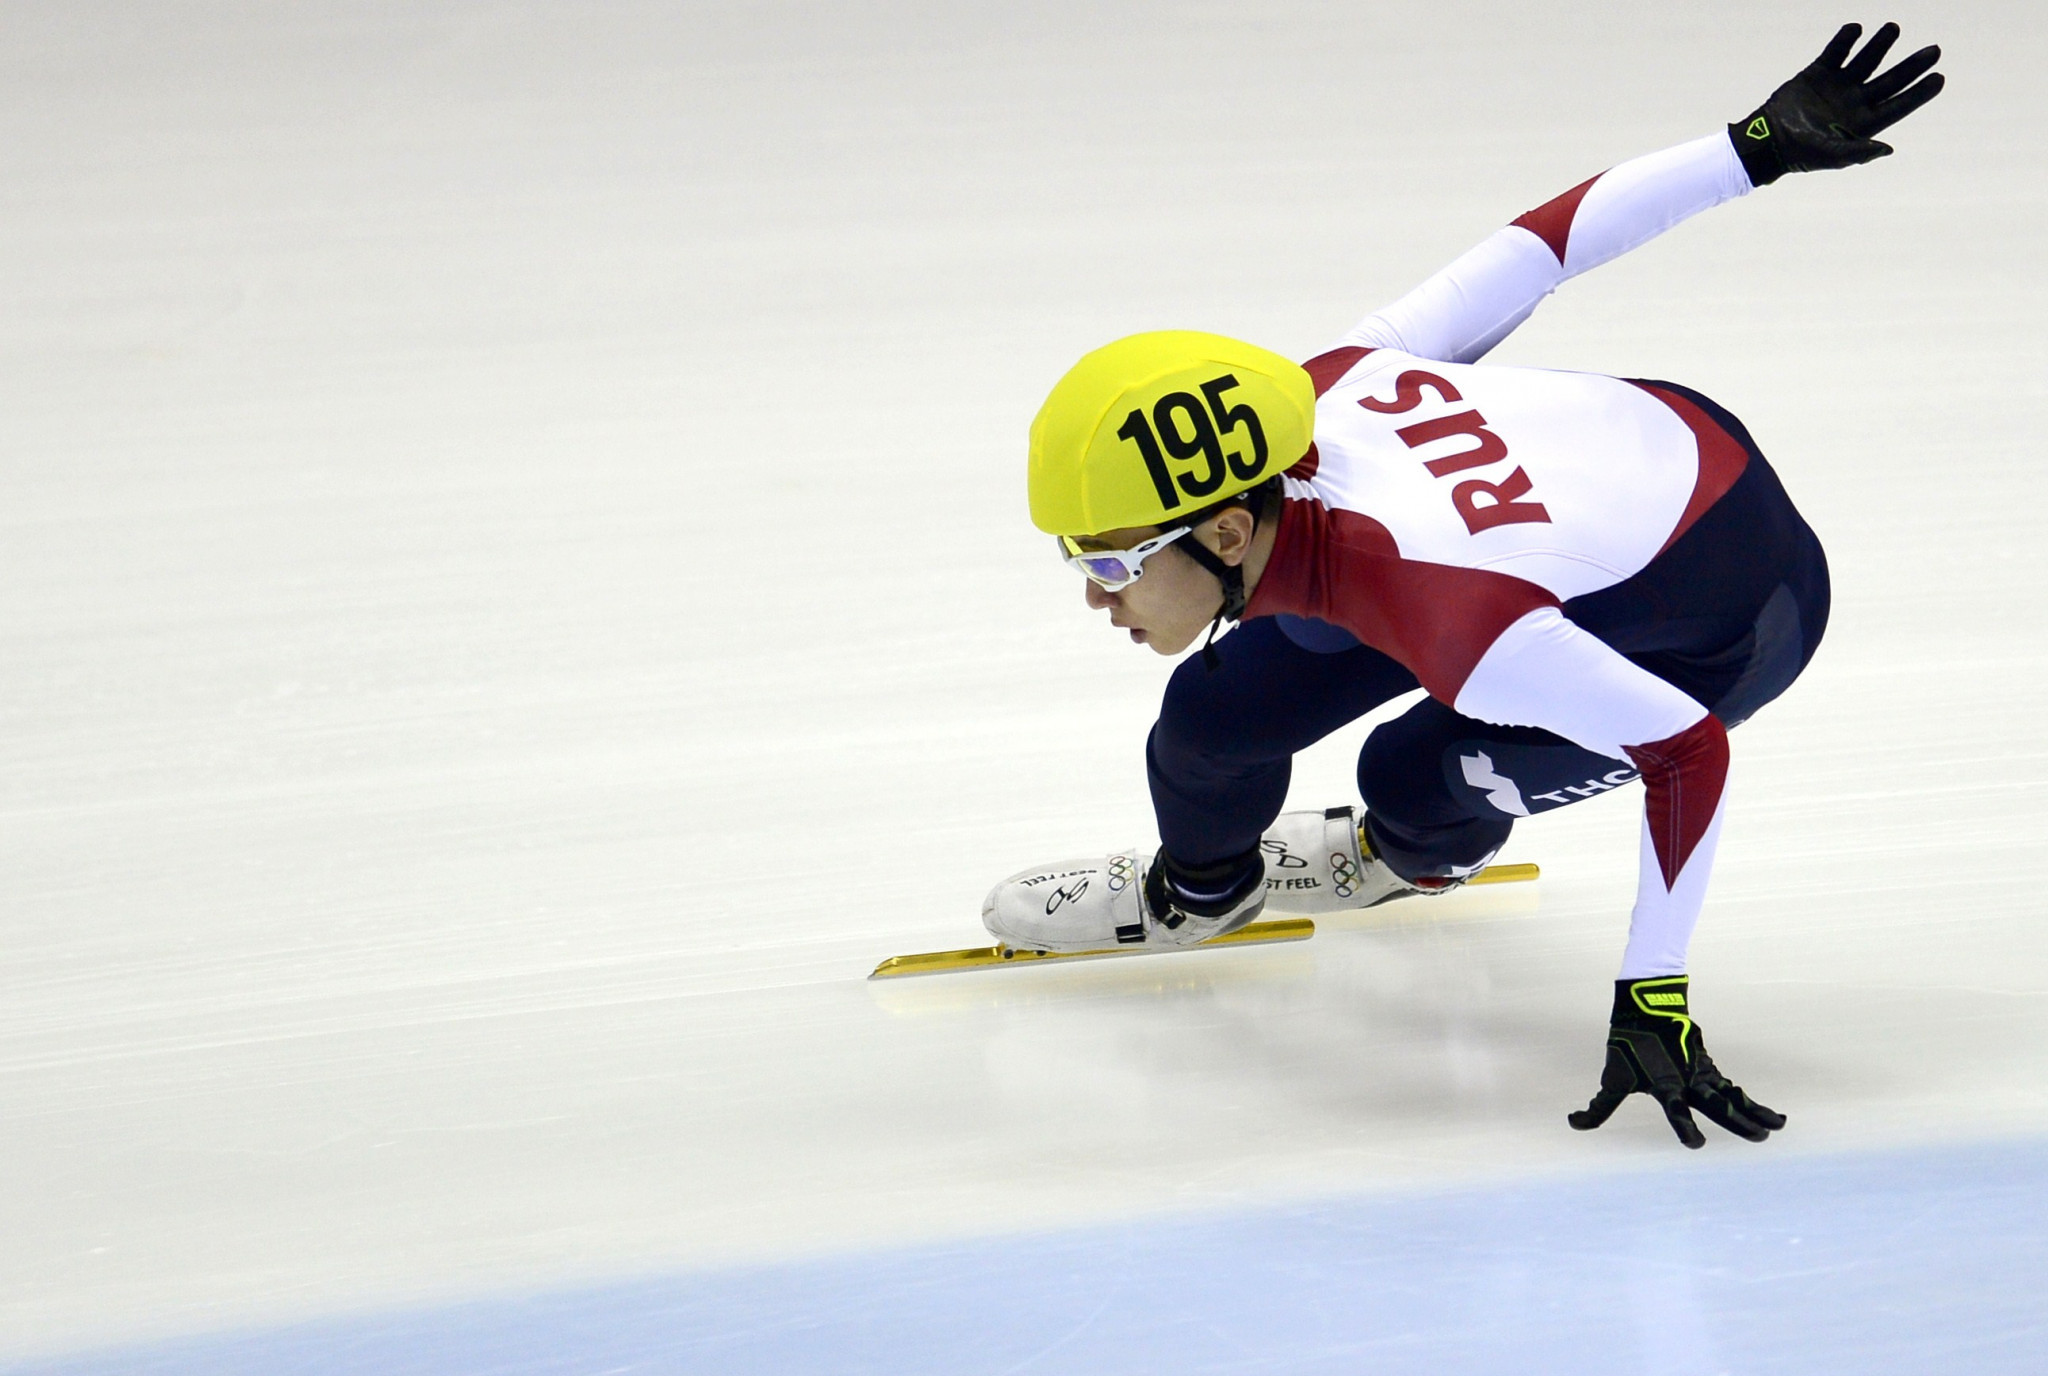 Viktor Ahn won three gold medals and one bronze representing Russia at Sochi 2014 ©Getty Images